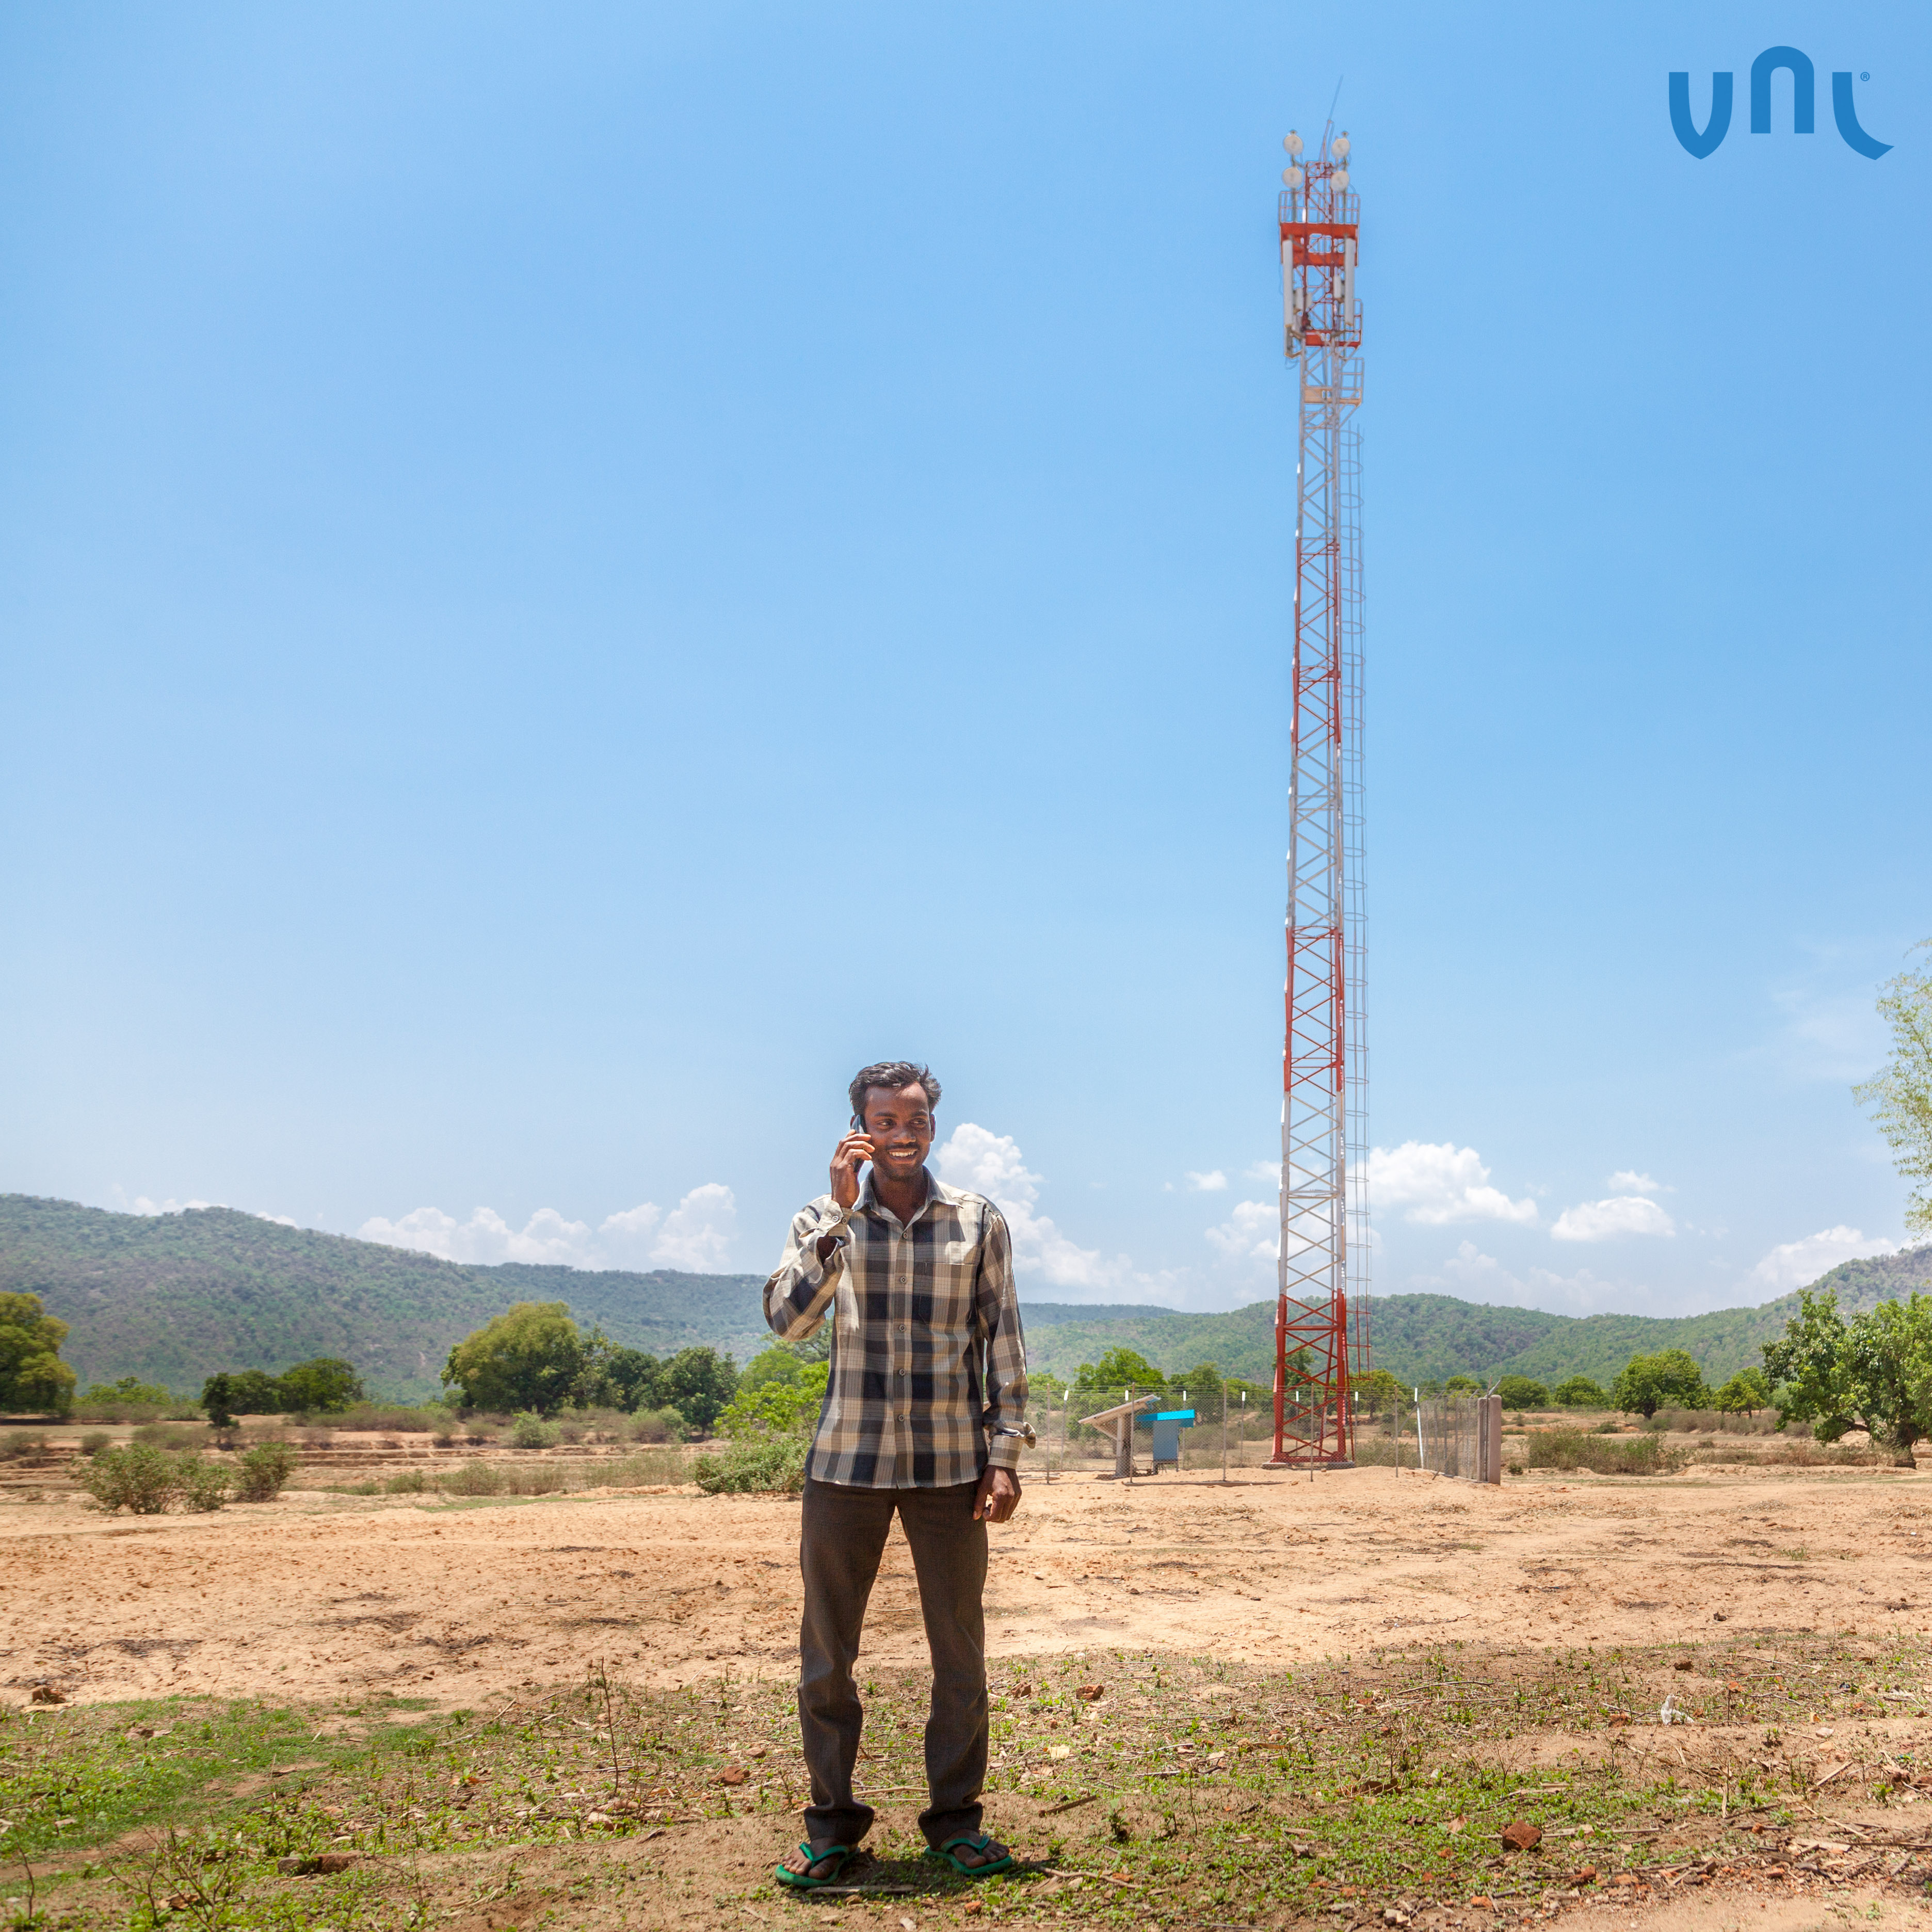 Man talking on mobile phone in Jharkhand, India, using BSNL's network Powered by VNL